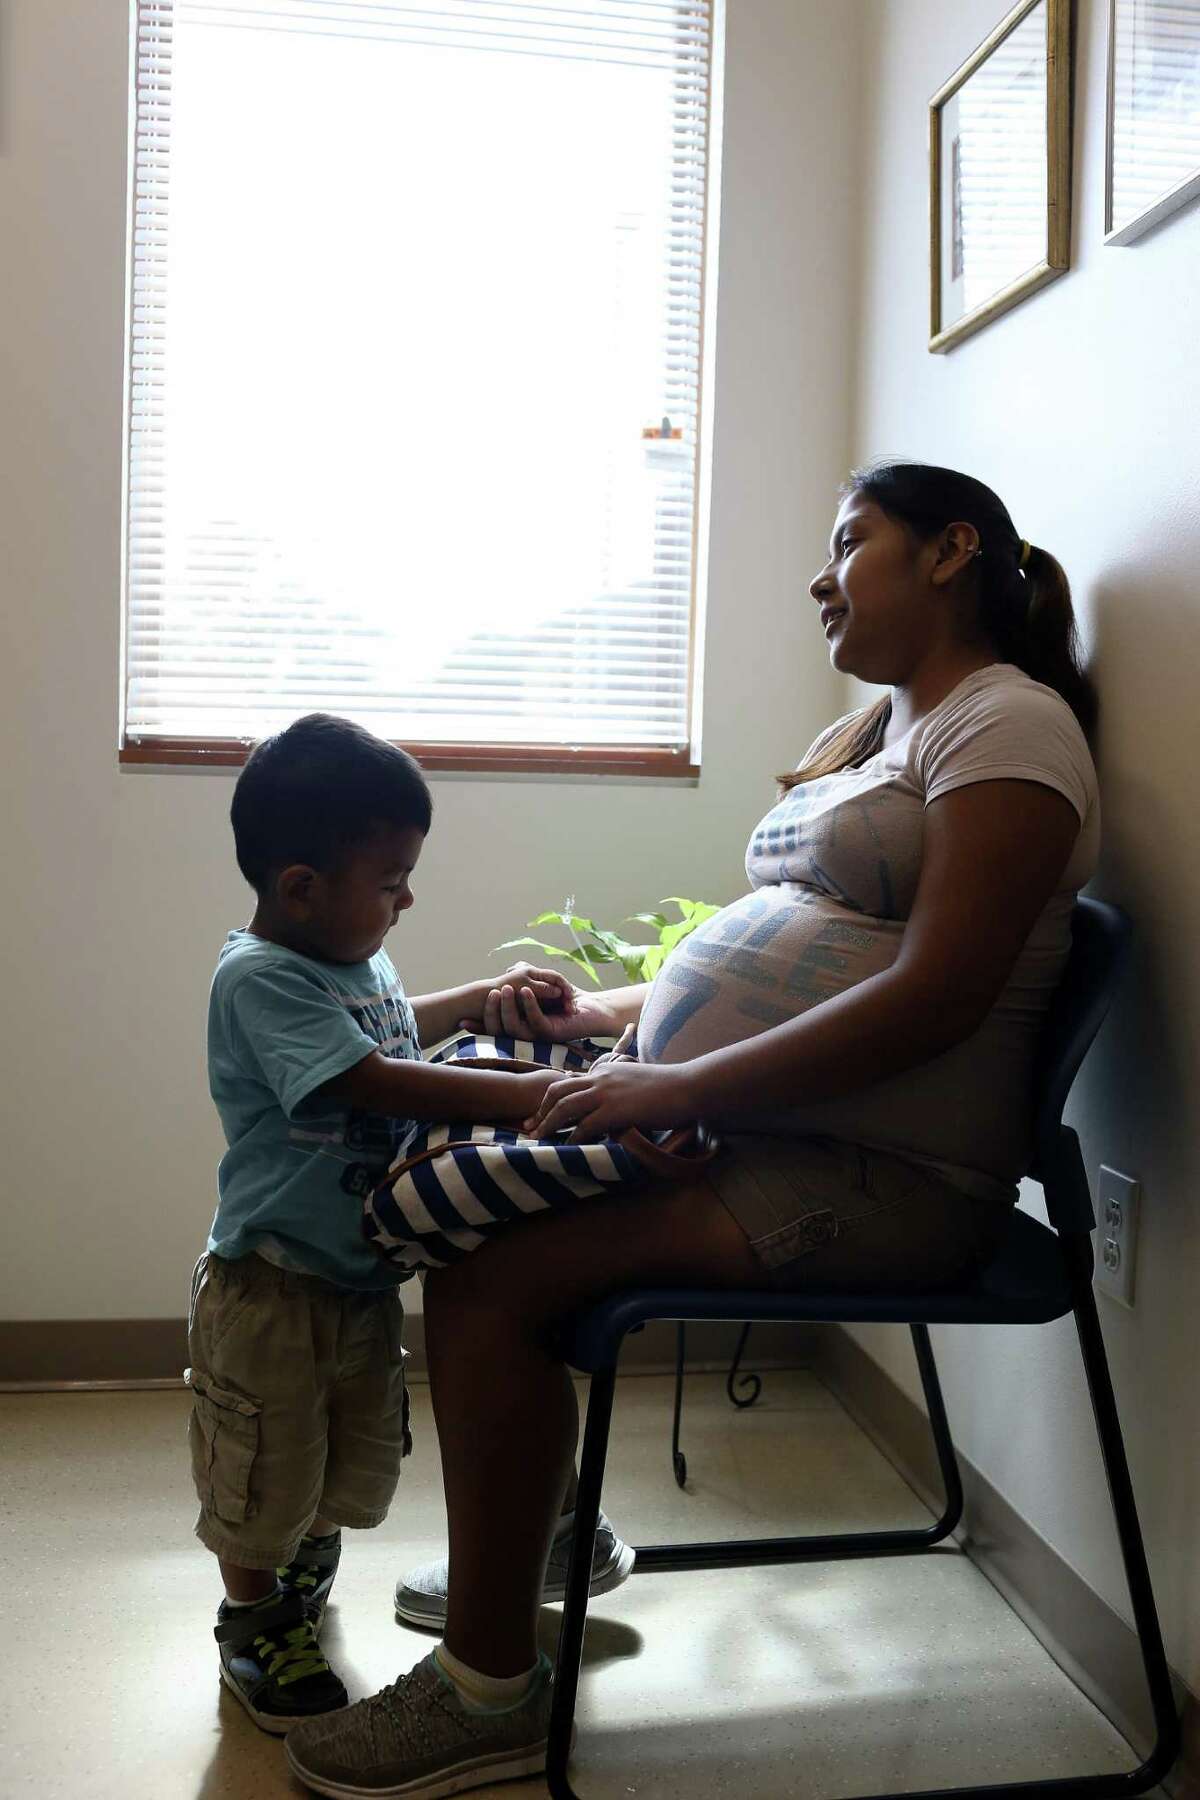 Diana Karen Valdez was eight months pregnant when she visited the Brownsville Community Health Center with her son, Mauricio, in September.